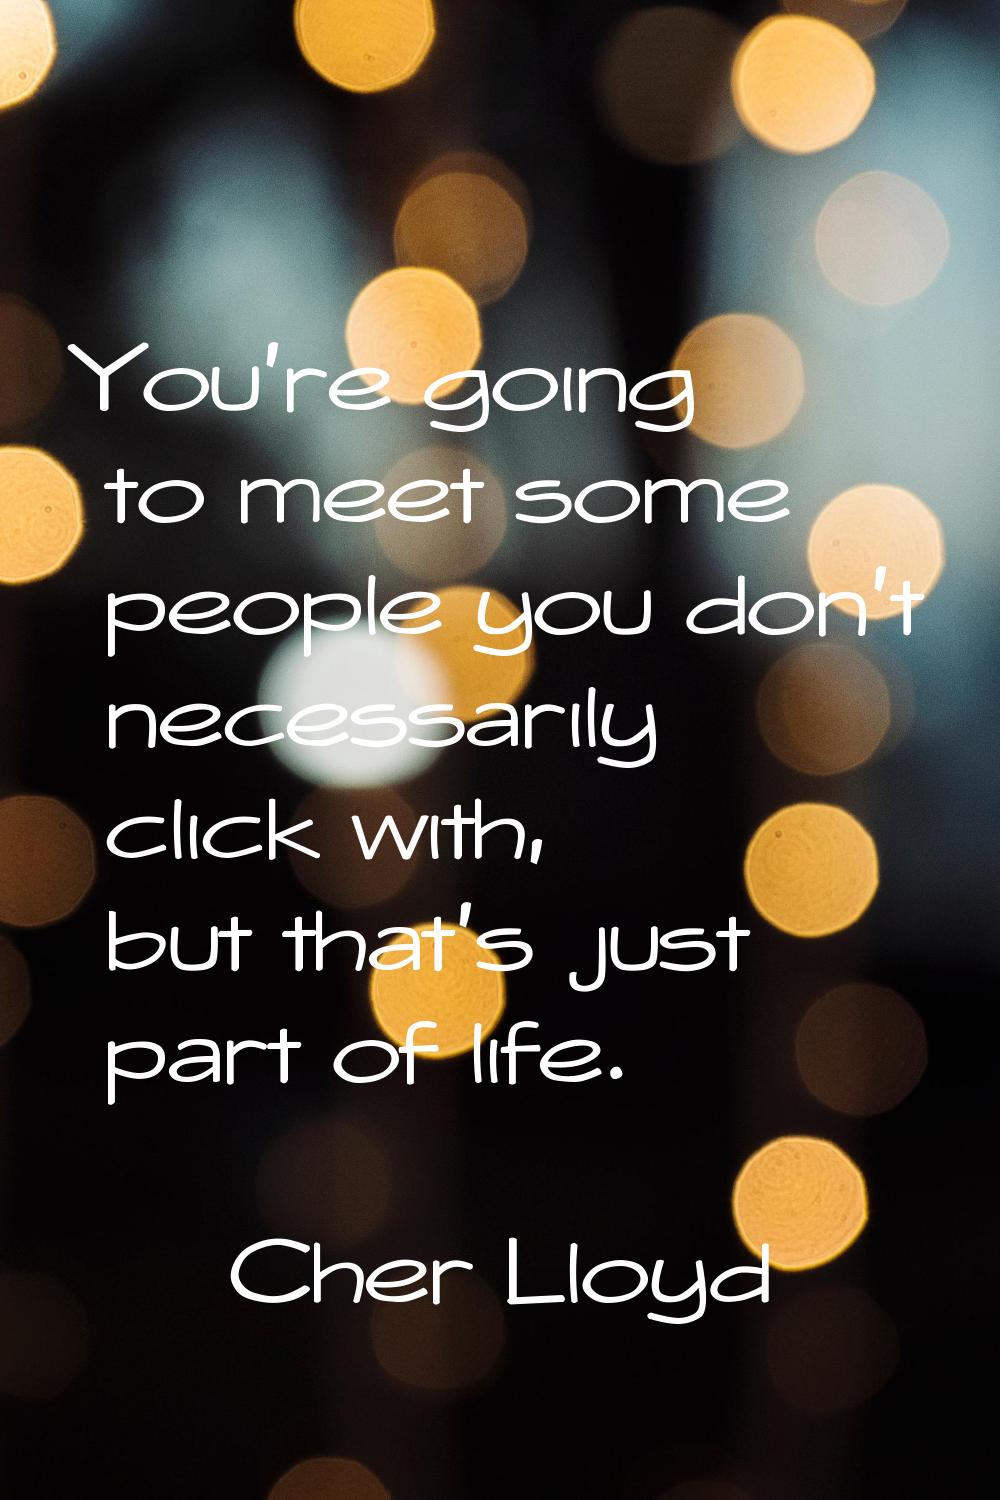 You're going to meet some people you don't necessarily click with, but that's just part of life.